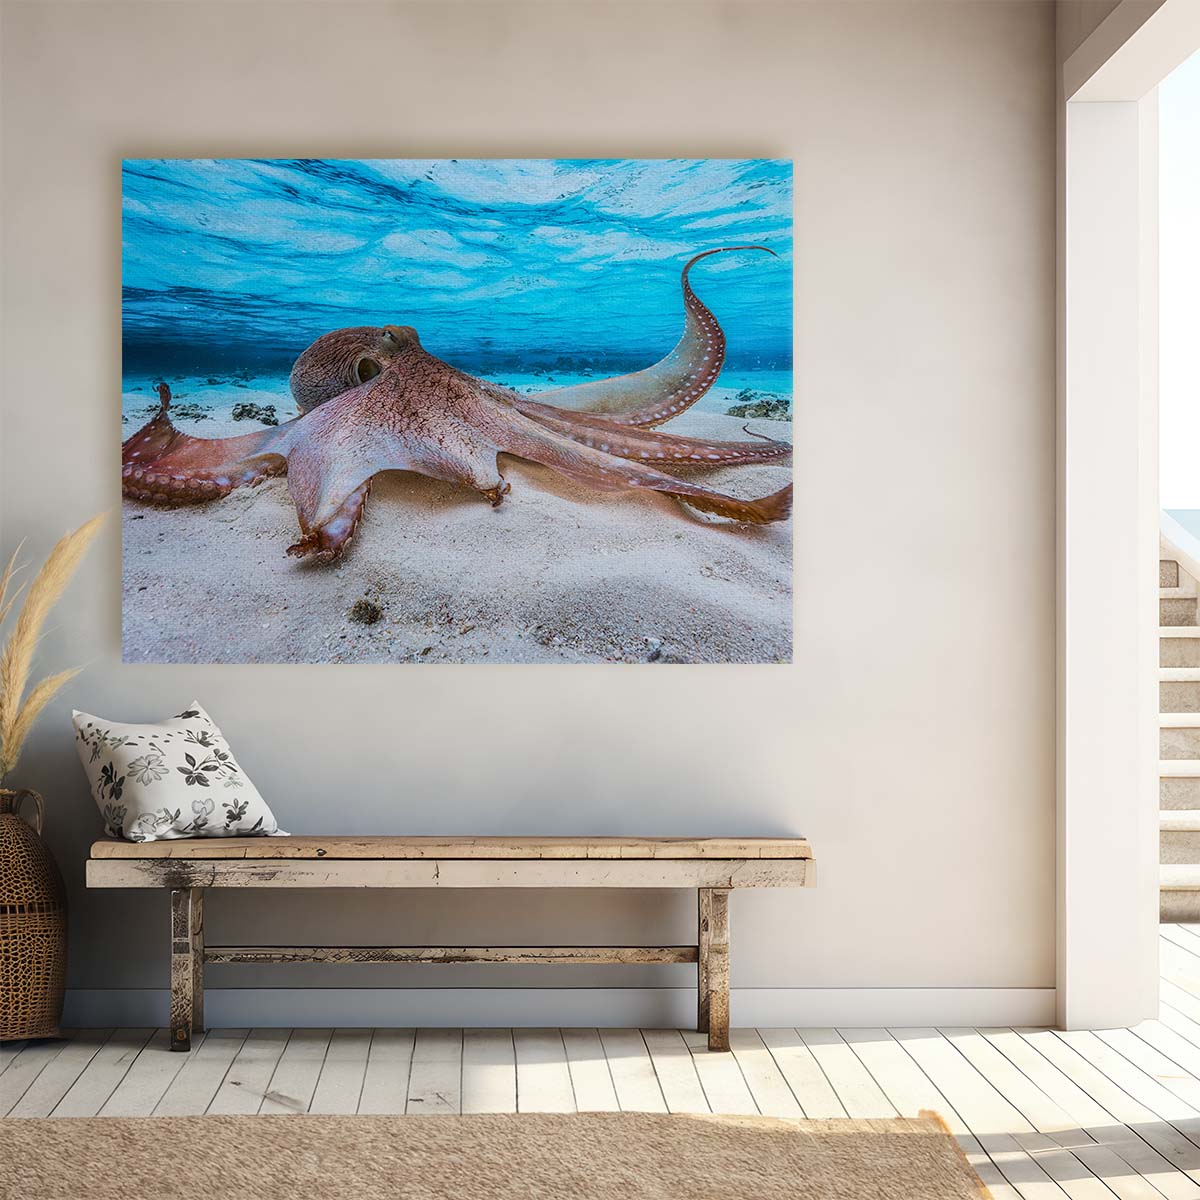 Octopus Oasis Underwater Seascape Wildlife Wall Art by Luxuriance Designs. Made in USA.